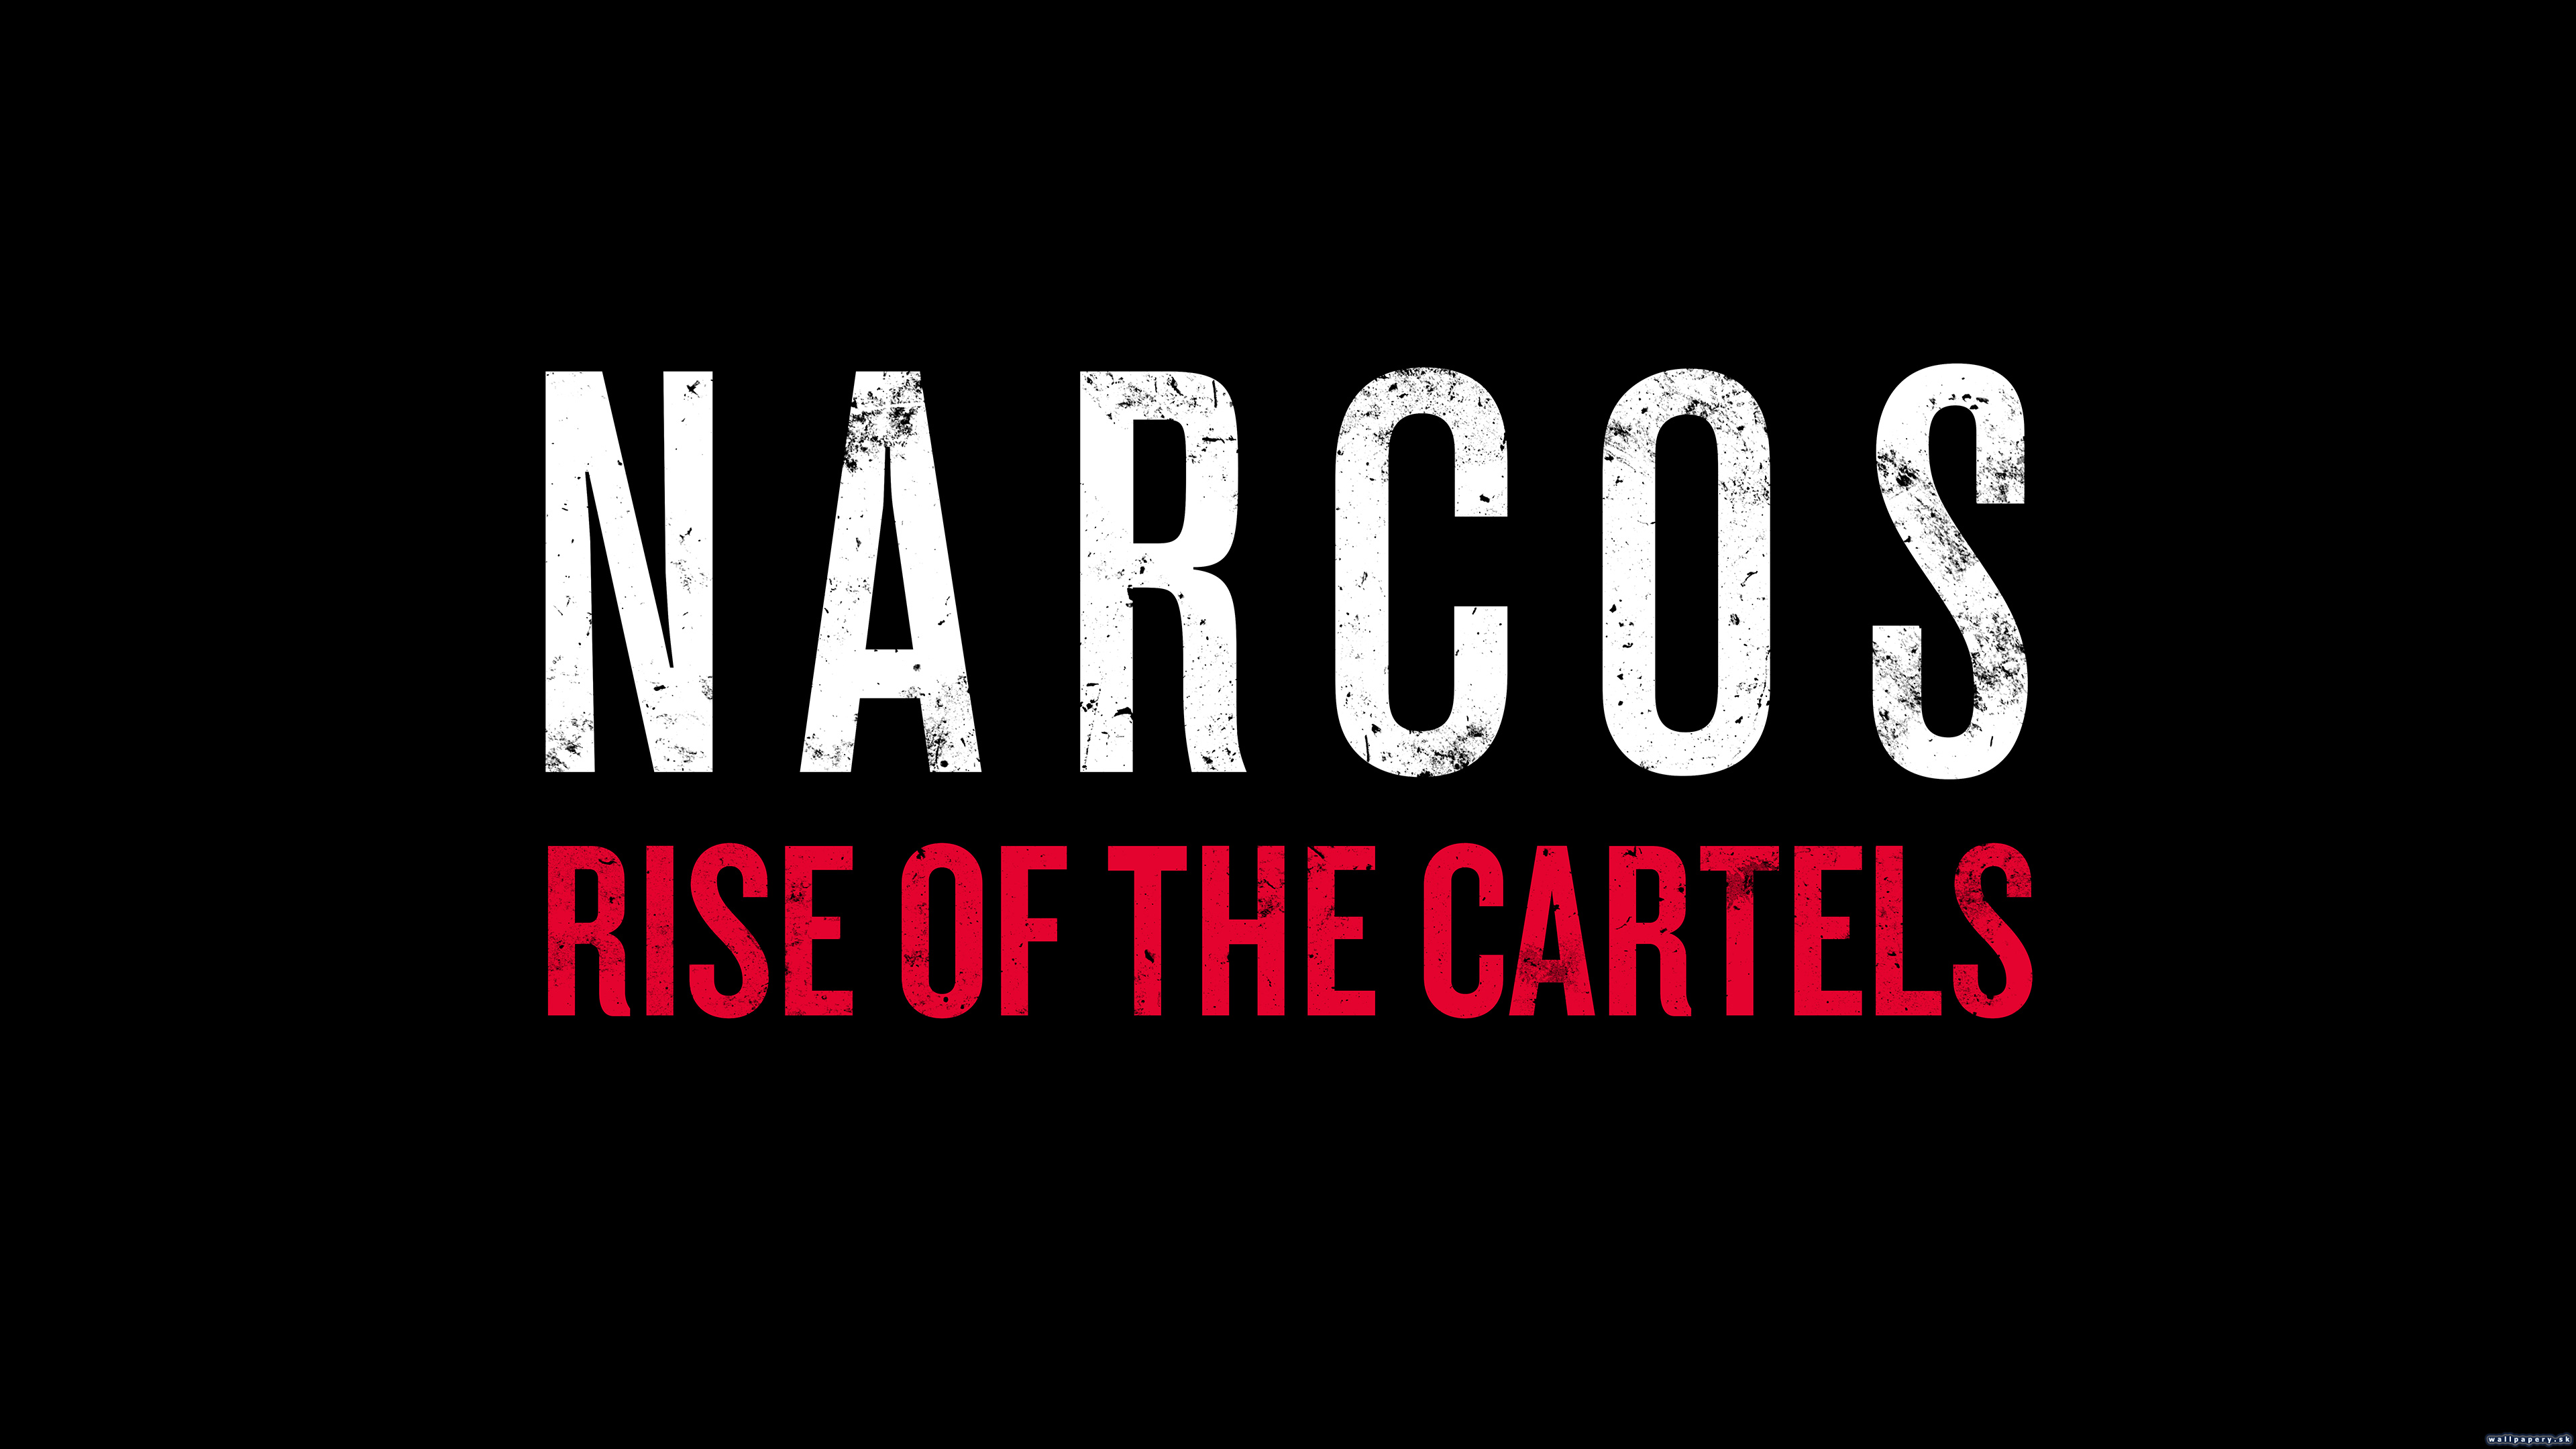 Narcos: Rise of the Cartels - wallpaper 3